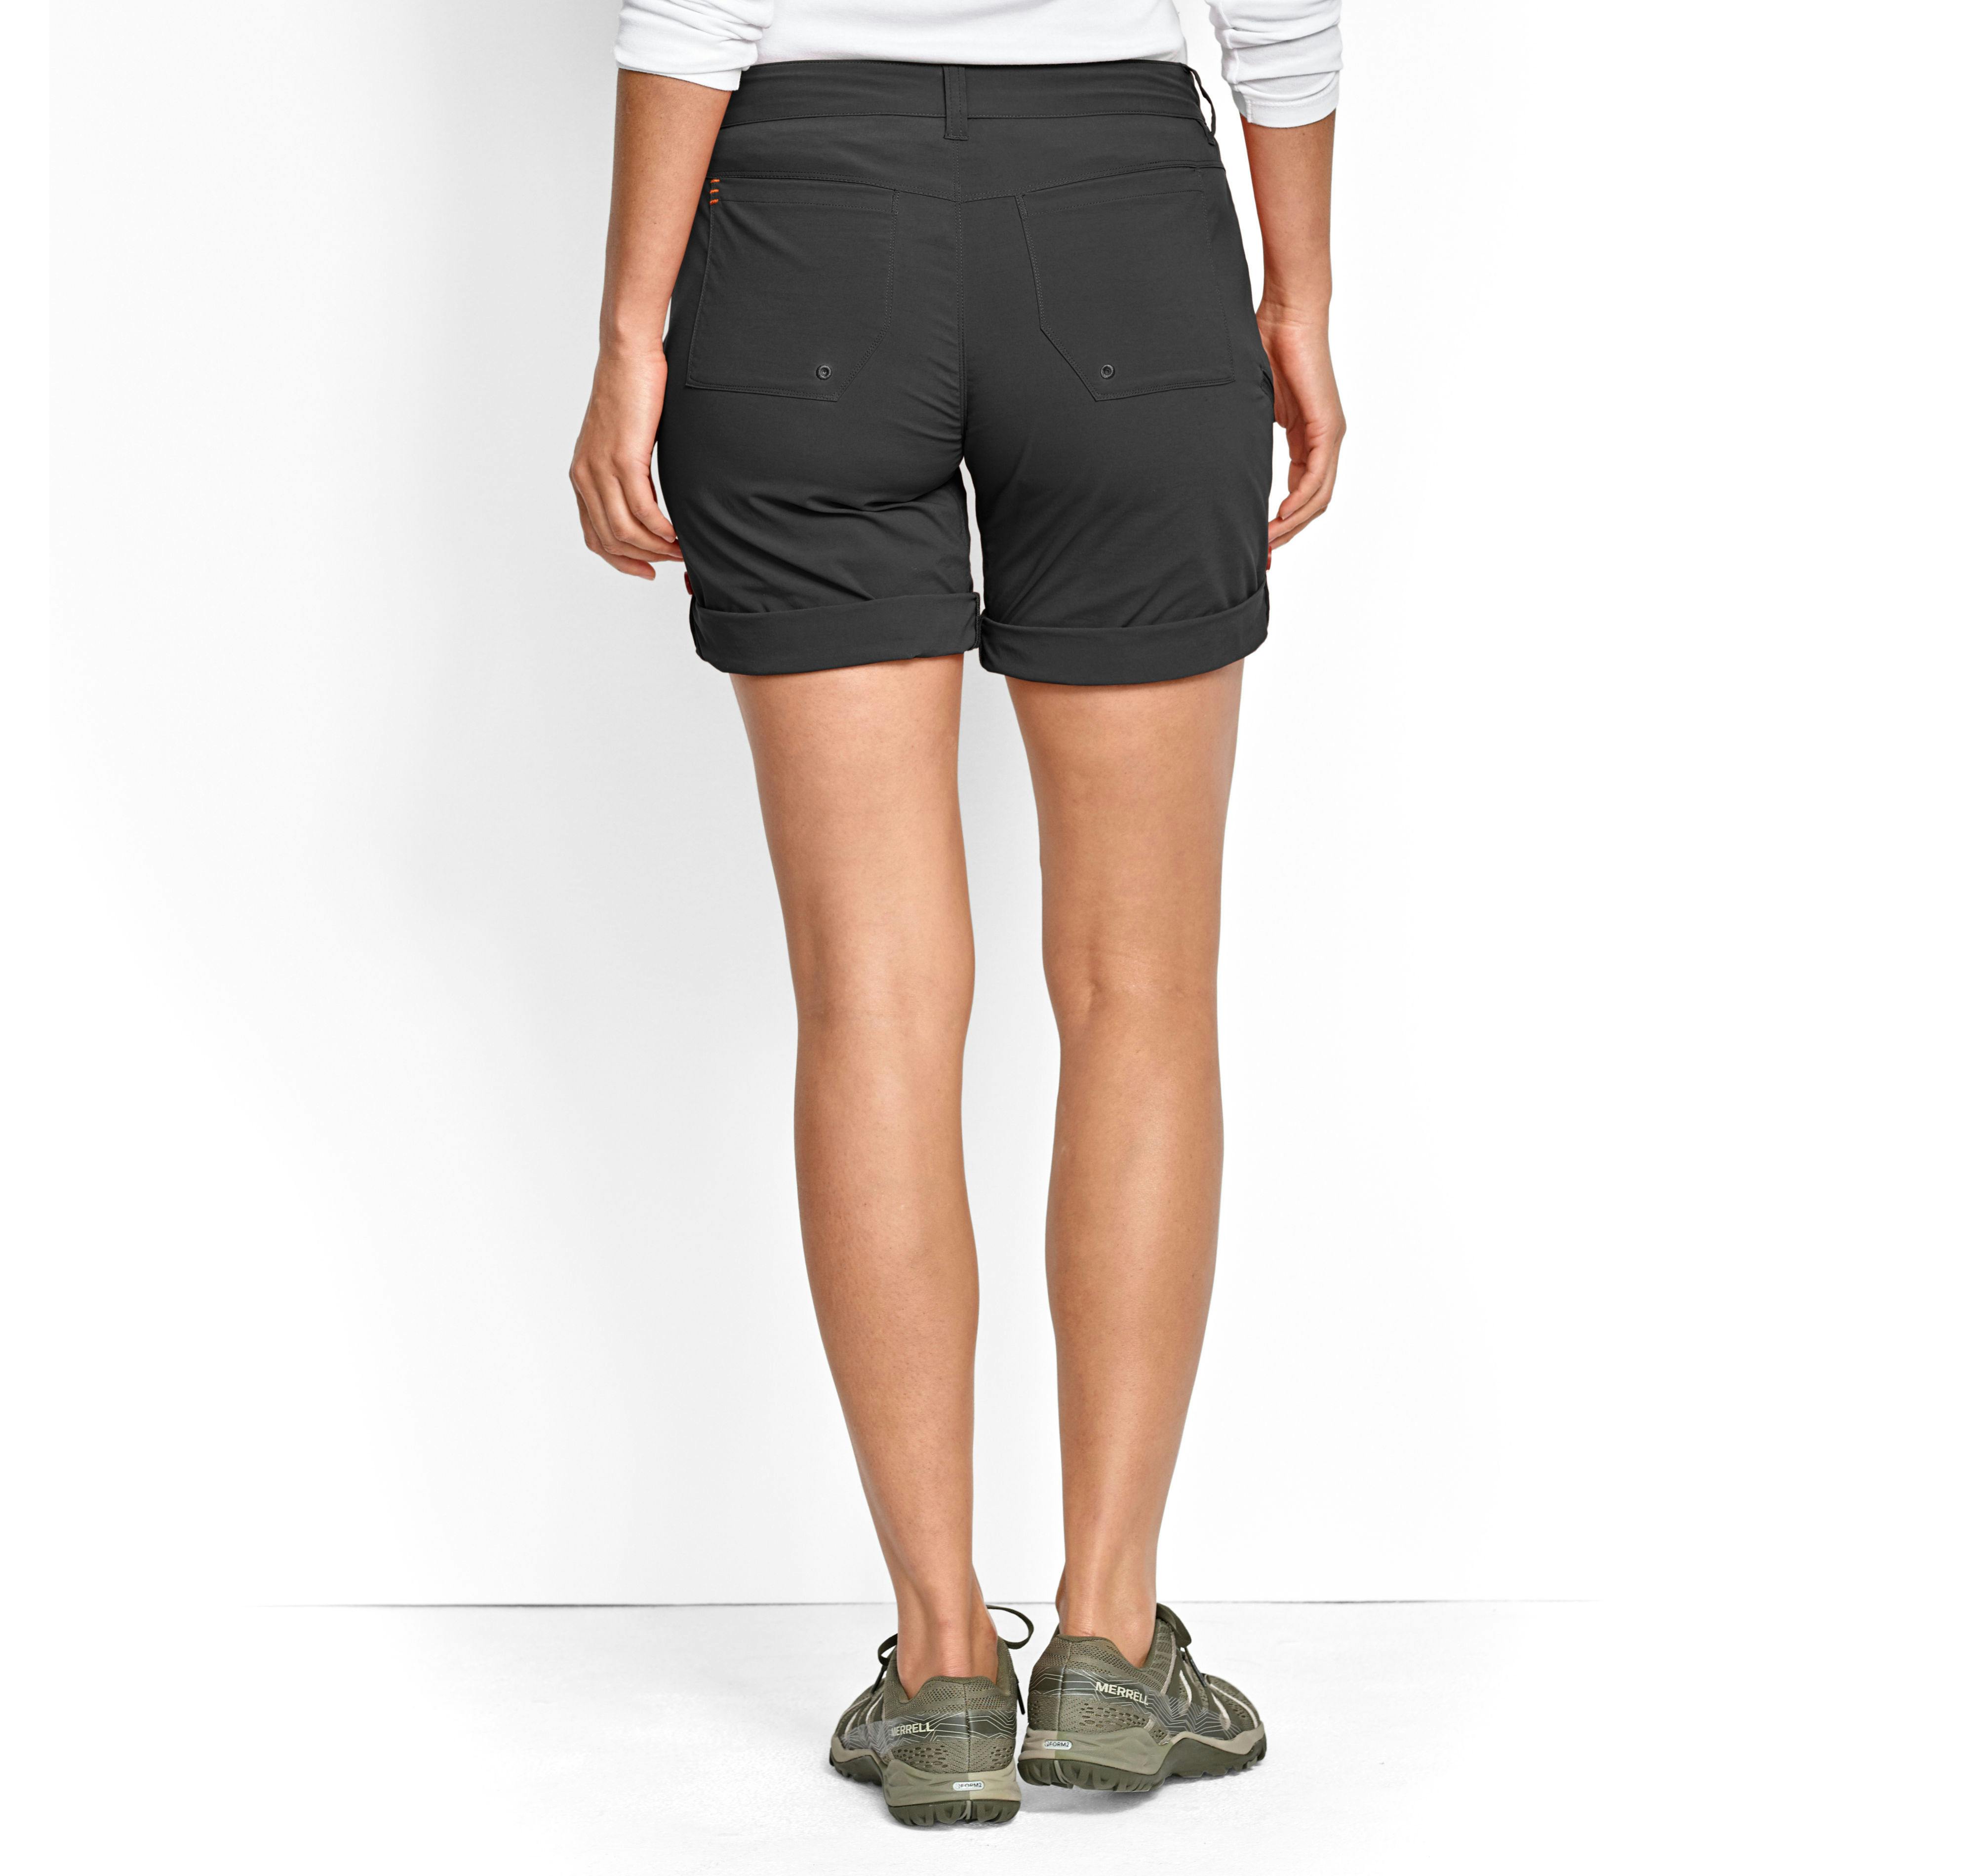 Orvis Women's Jackson Quick-Dry Natural Fit Convertible 8½" Shorts